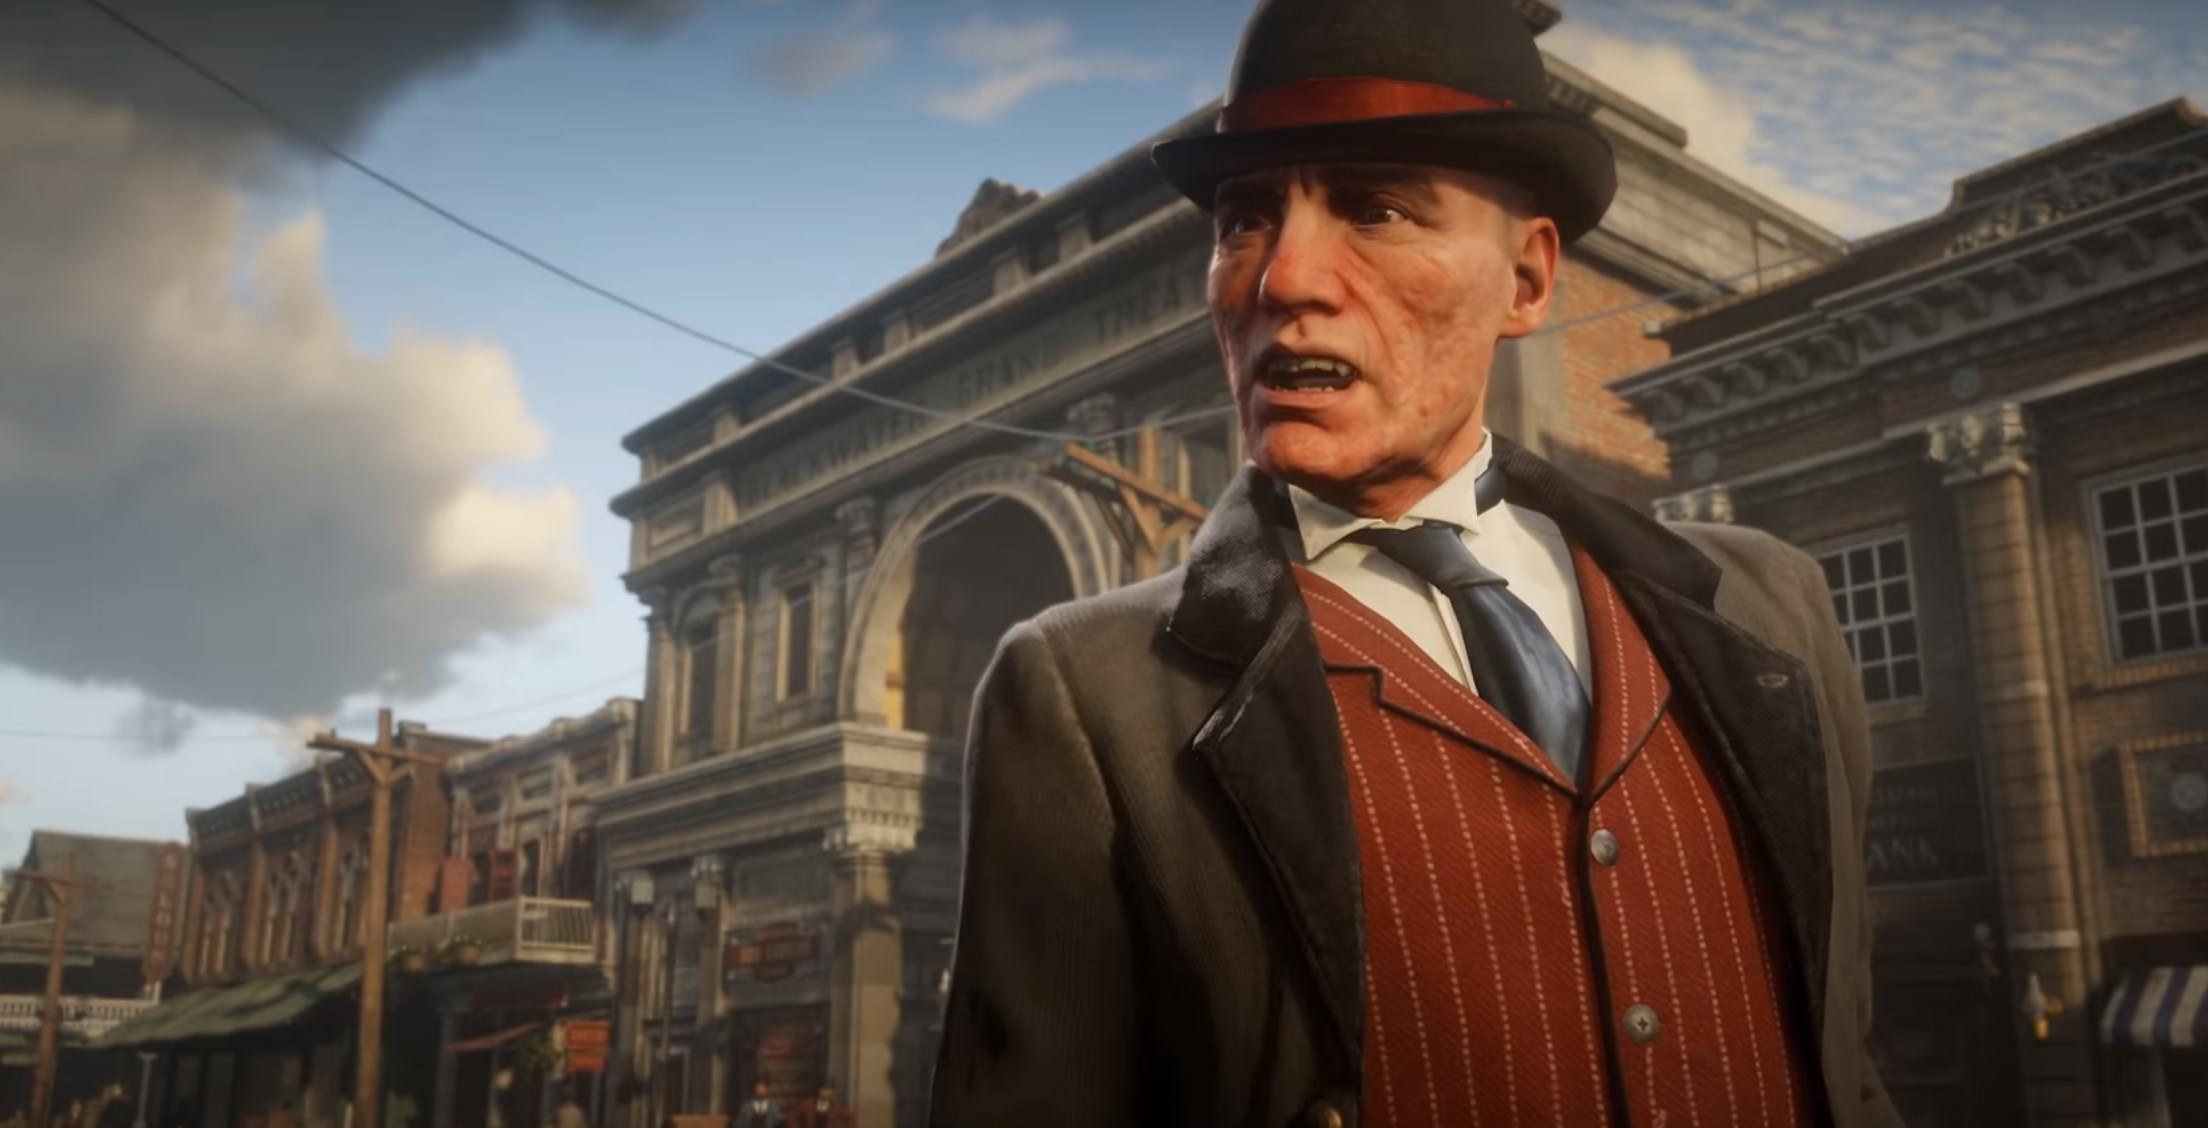 Legal battle between Rockstar/Take-Two and real-life Pinkertons comes to an end